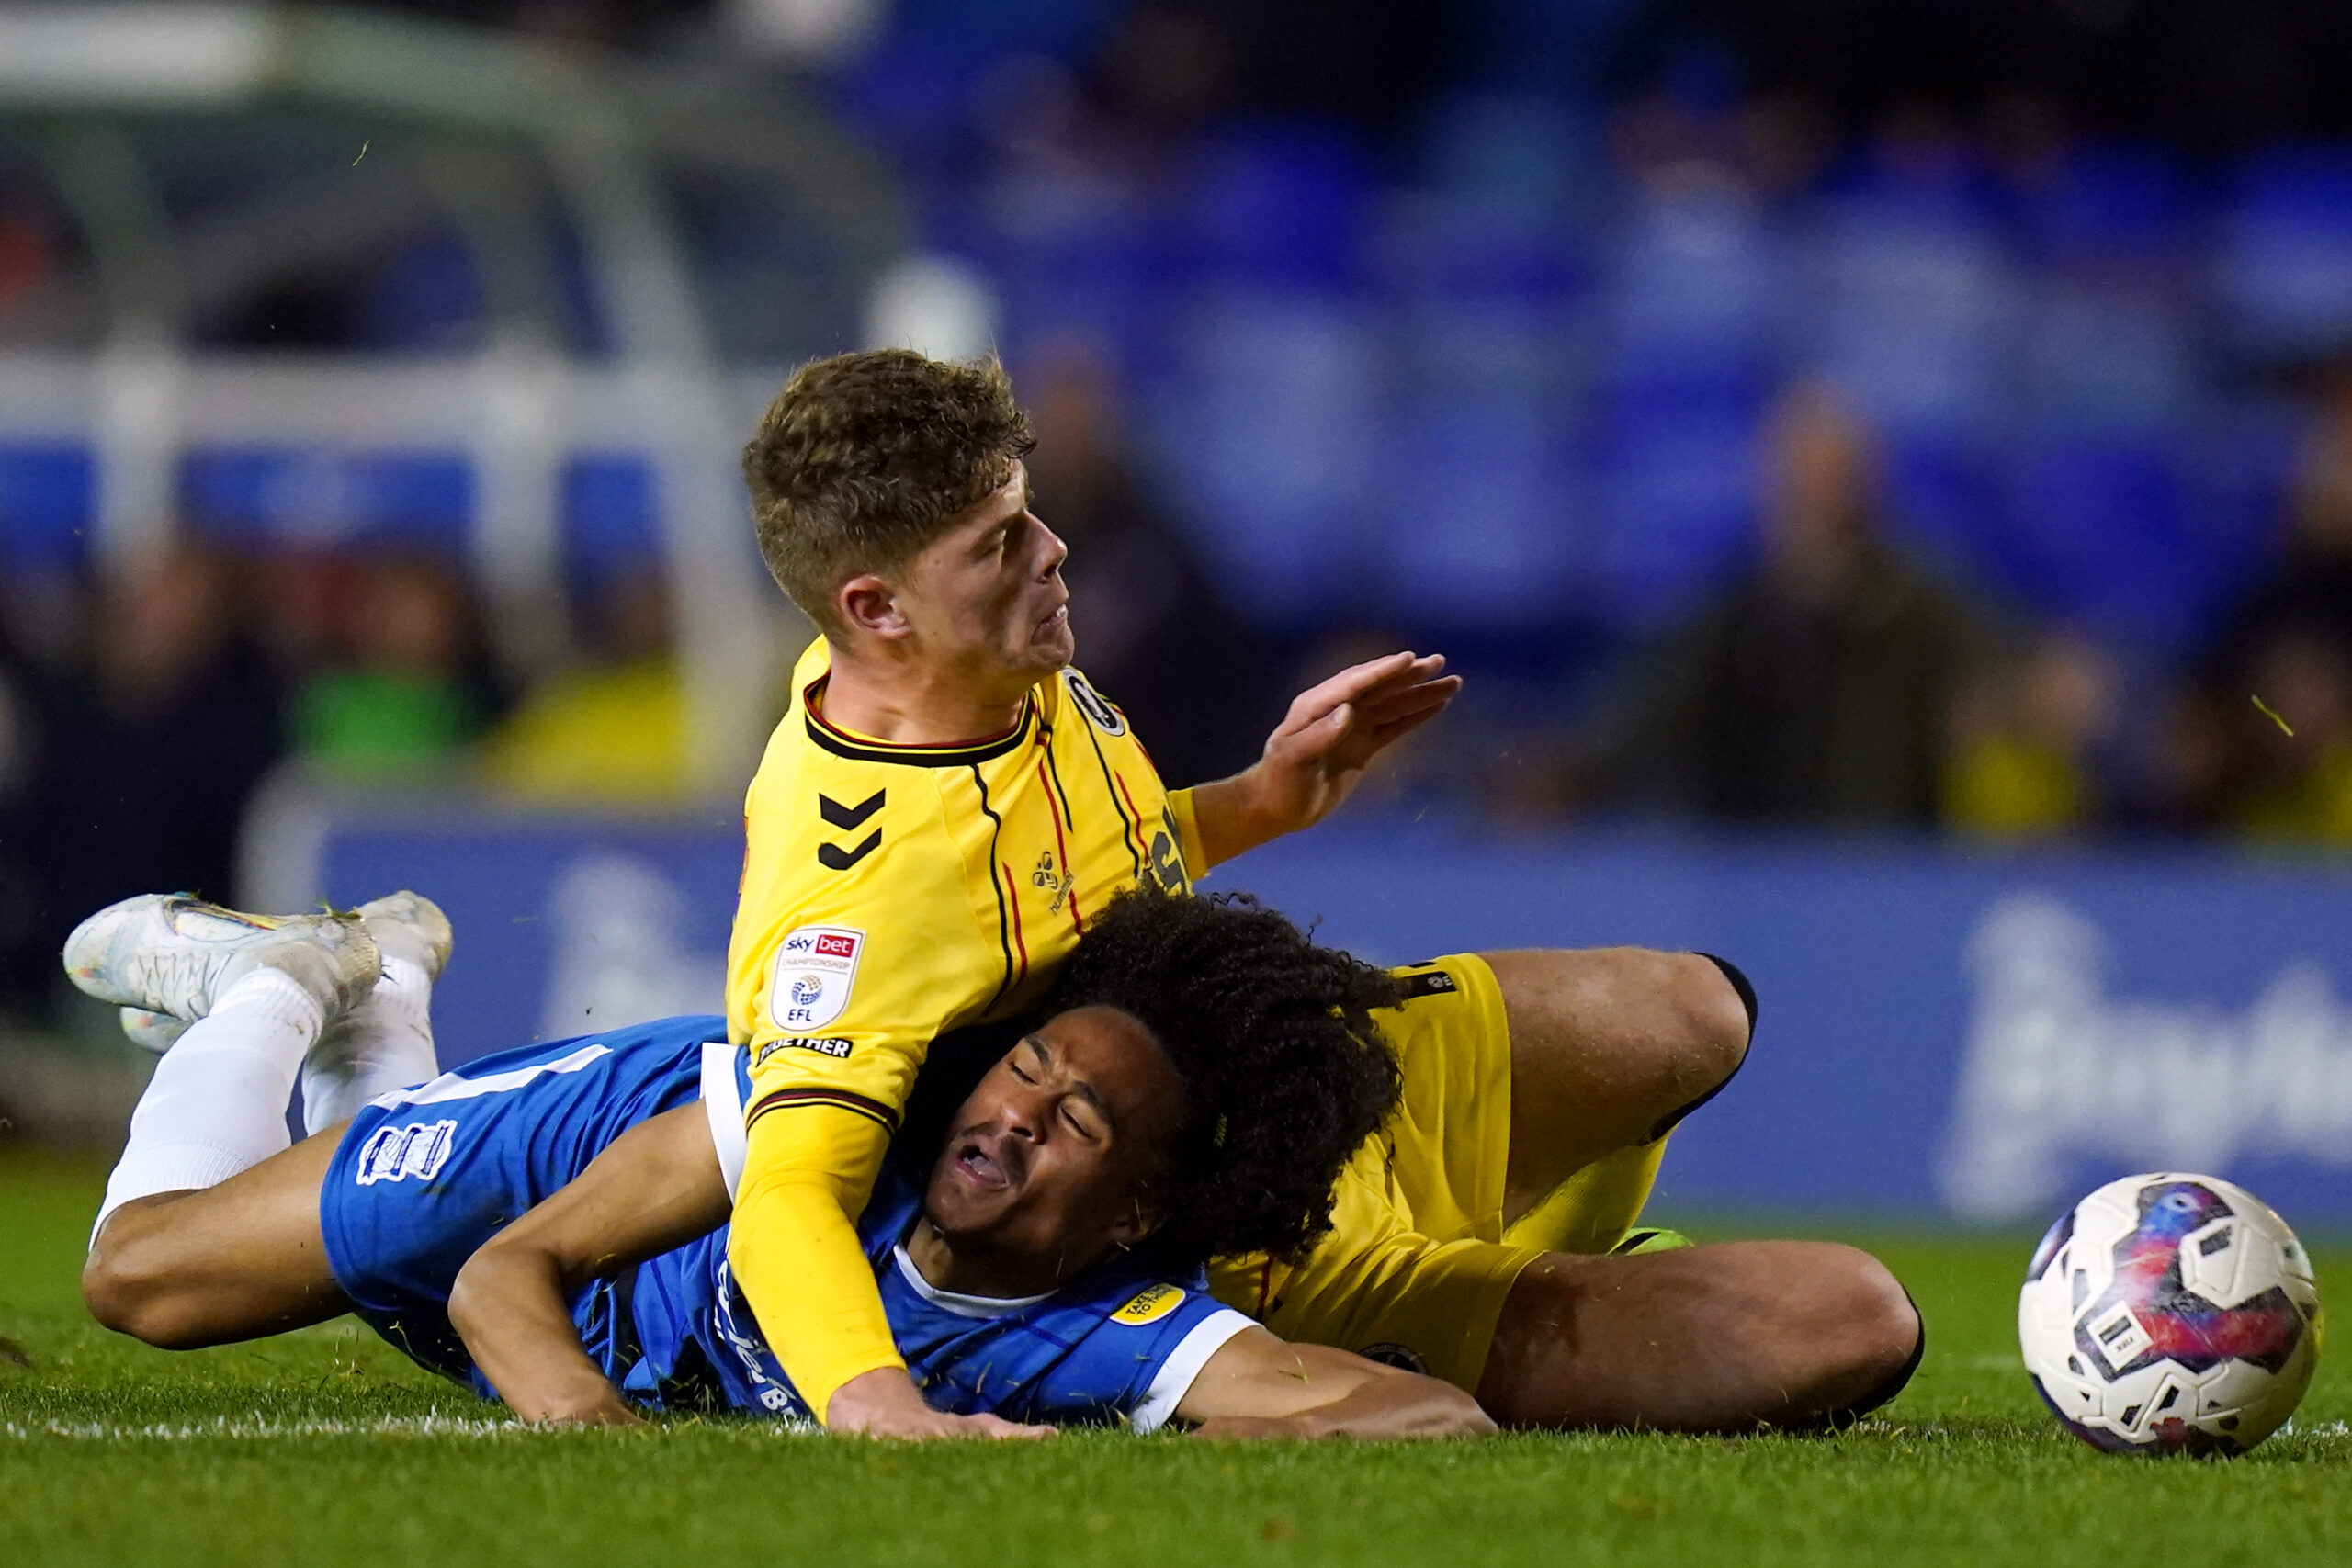 Leeds United loanee Charlie Cresswell suffered fractured eye socket in  Millwall's 0-0 draw at West Brom – South London News